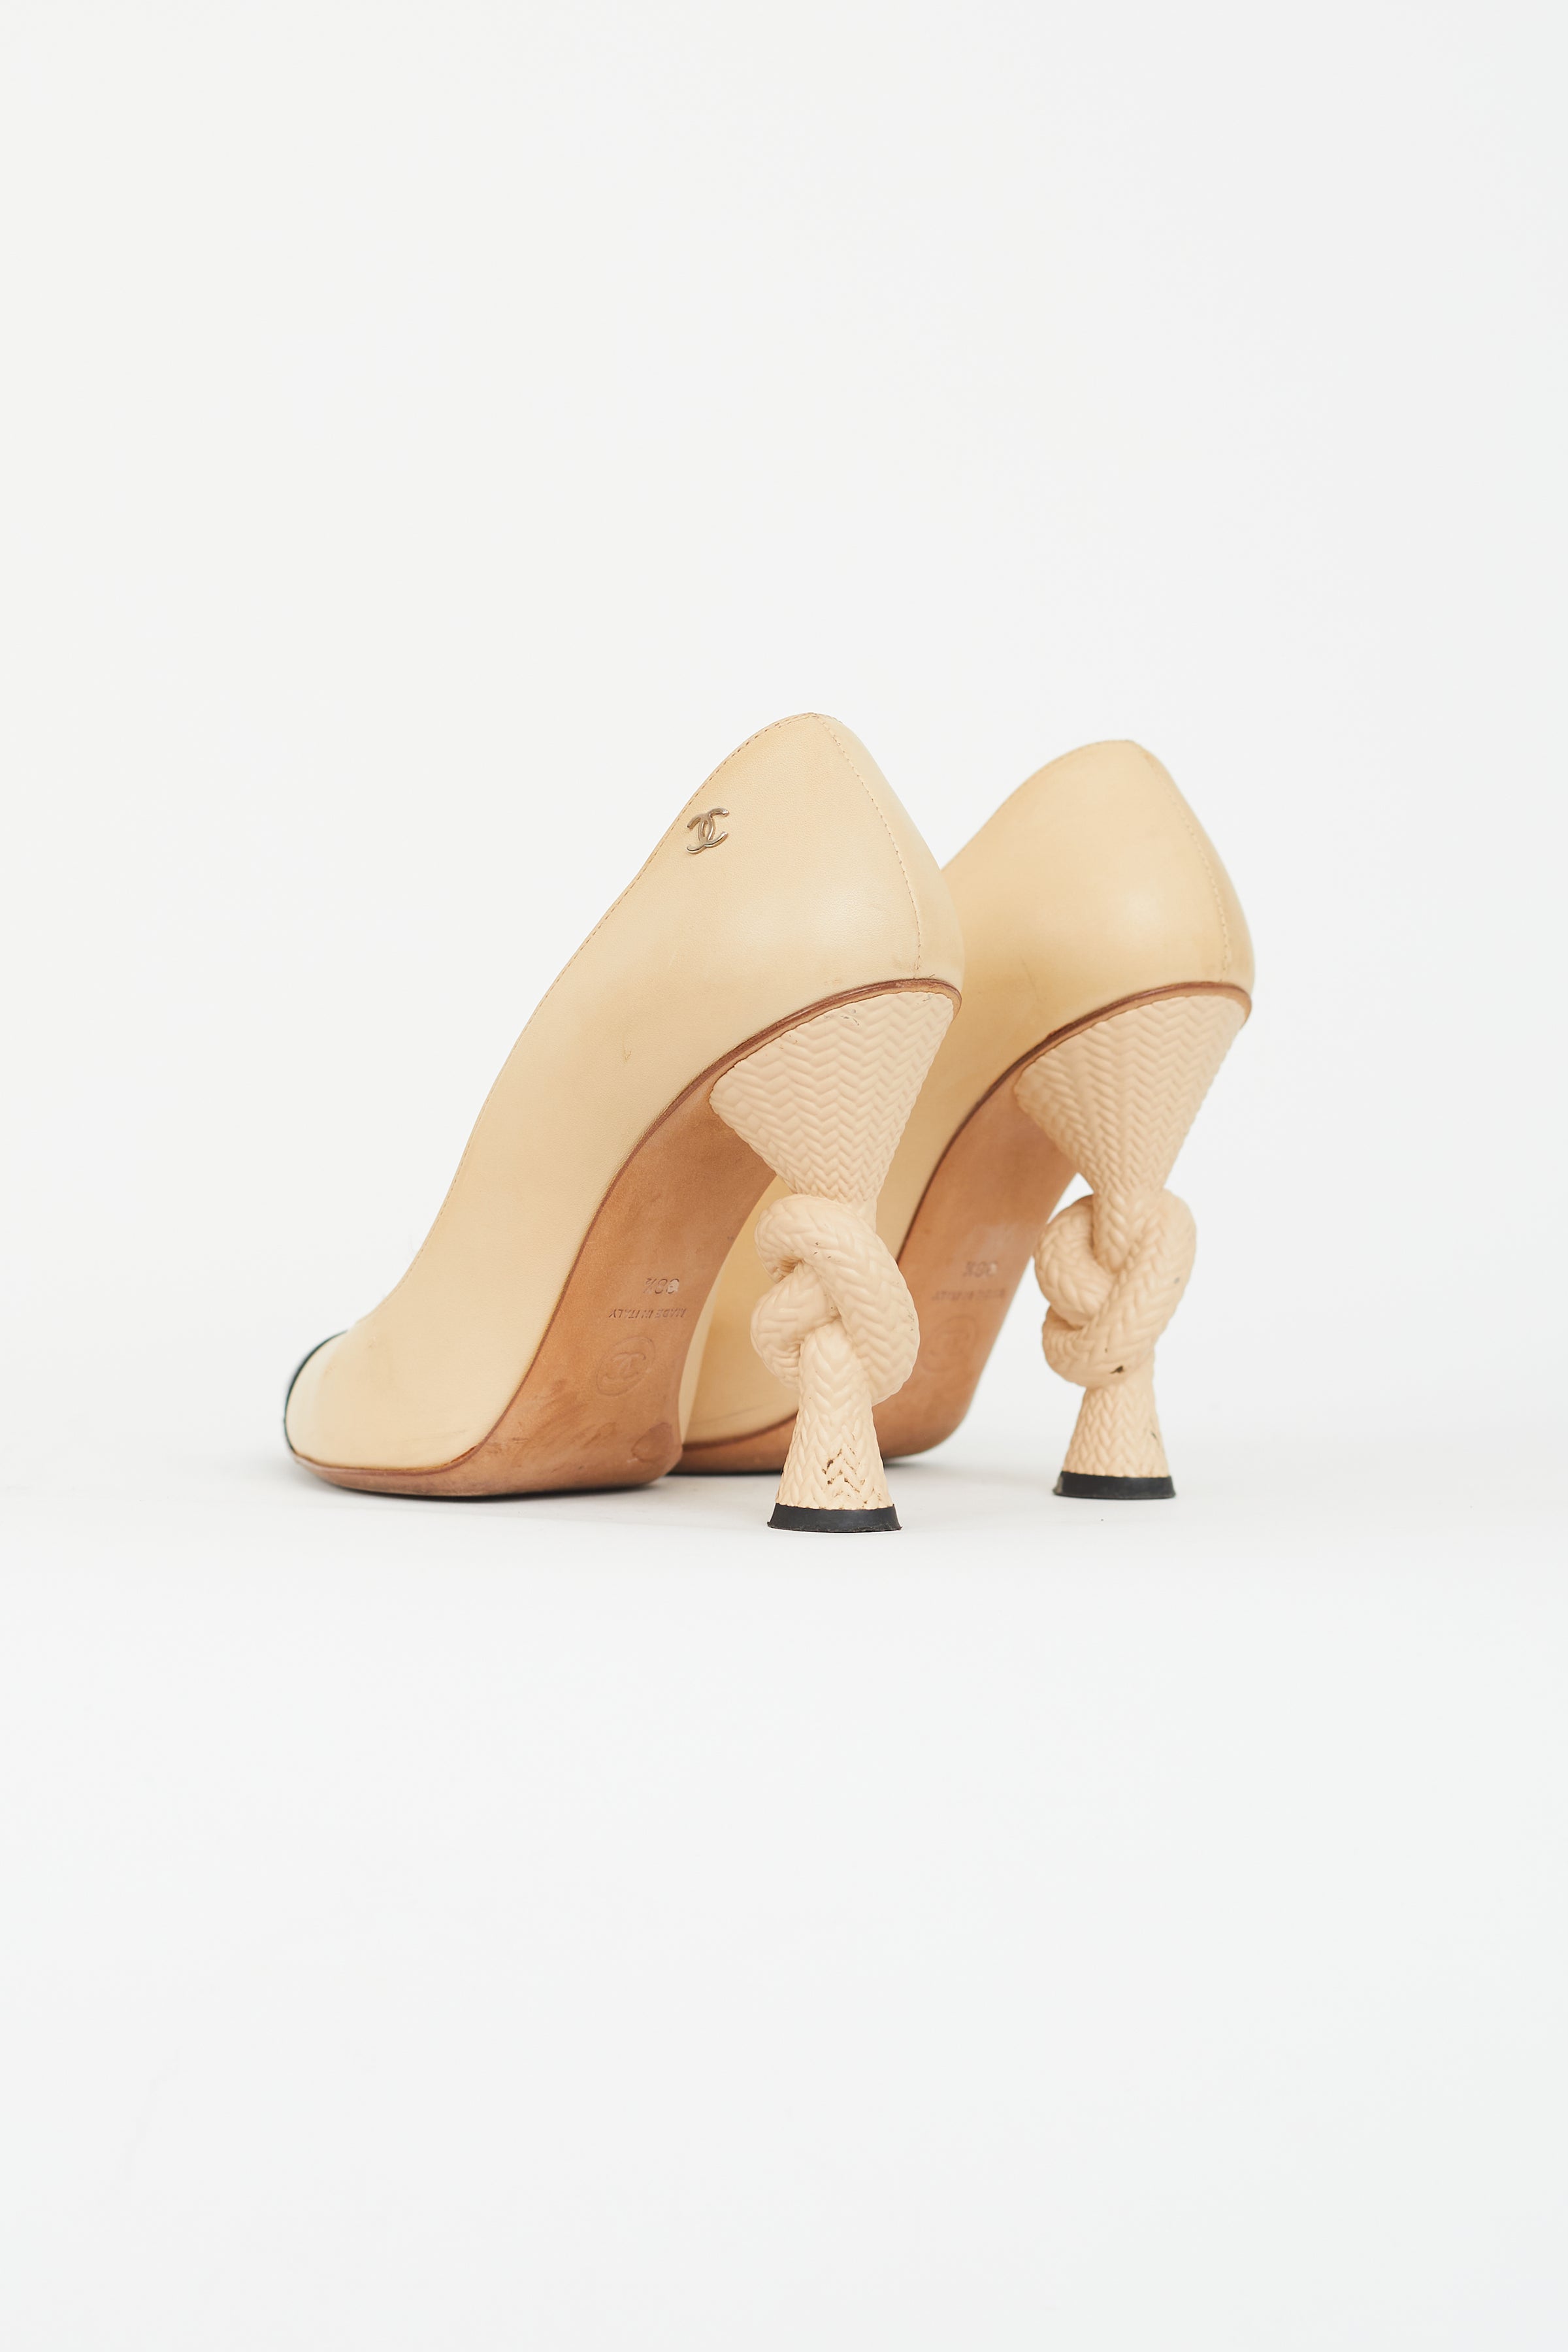 Chanel // Beige Leather Knotted Heel Pump – VSP Consignment